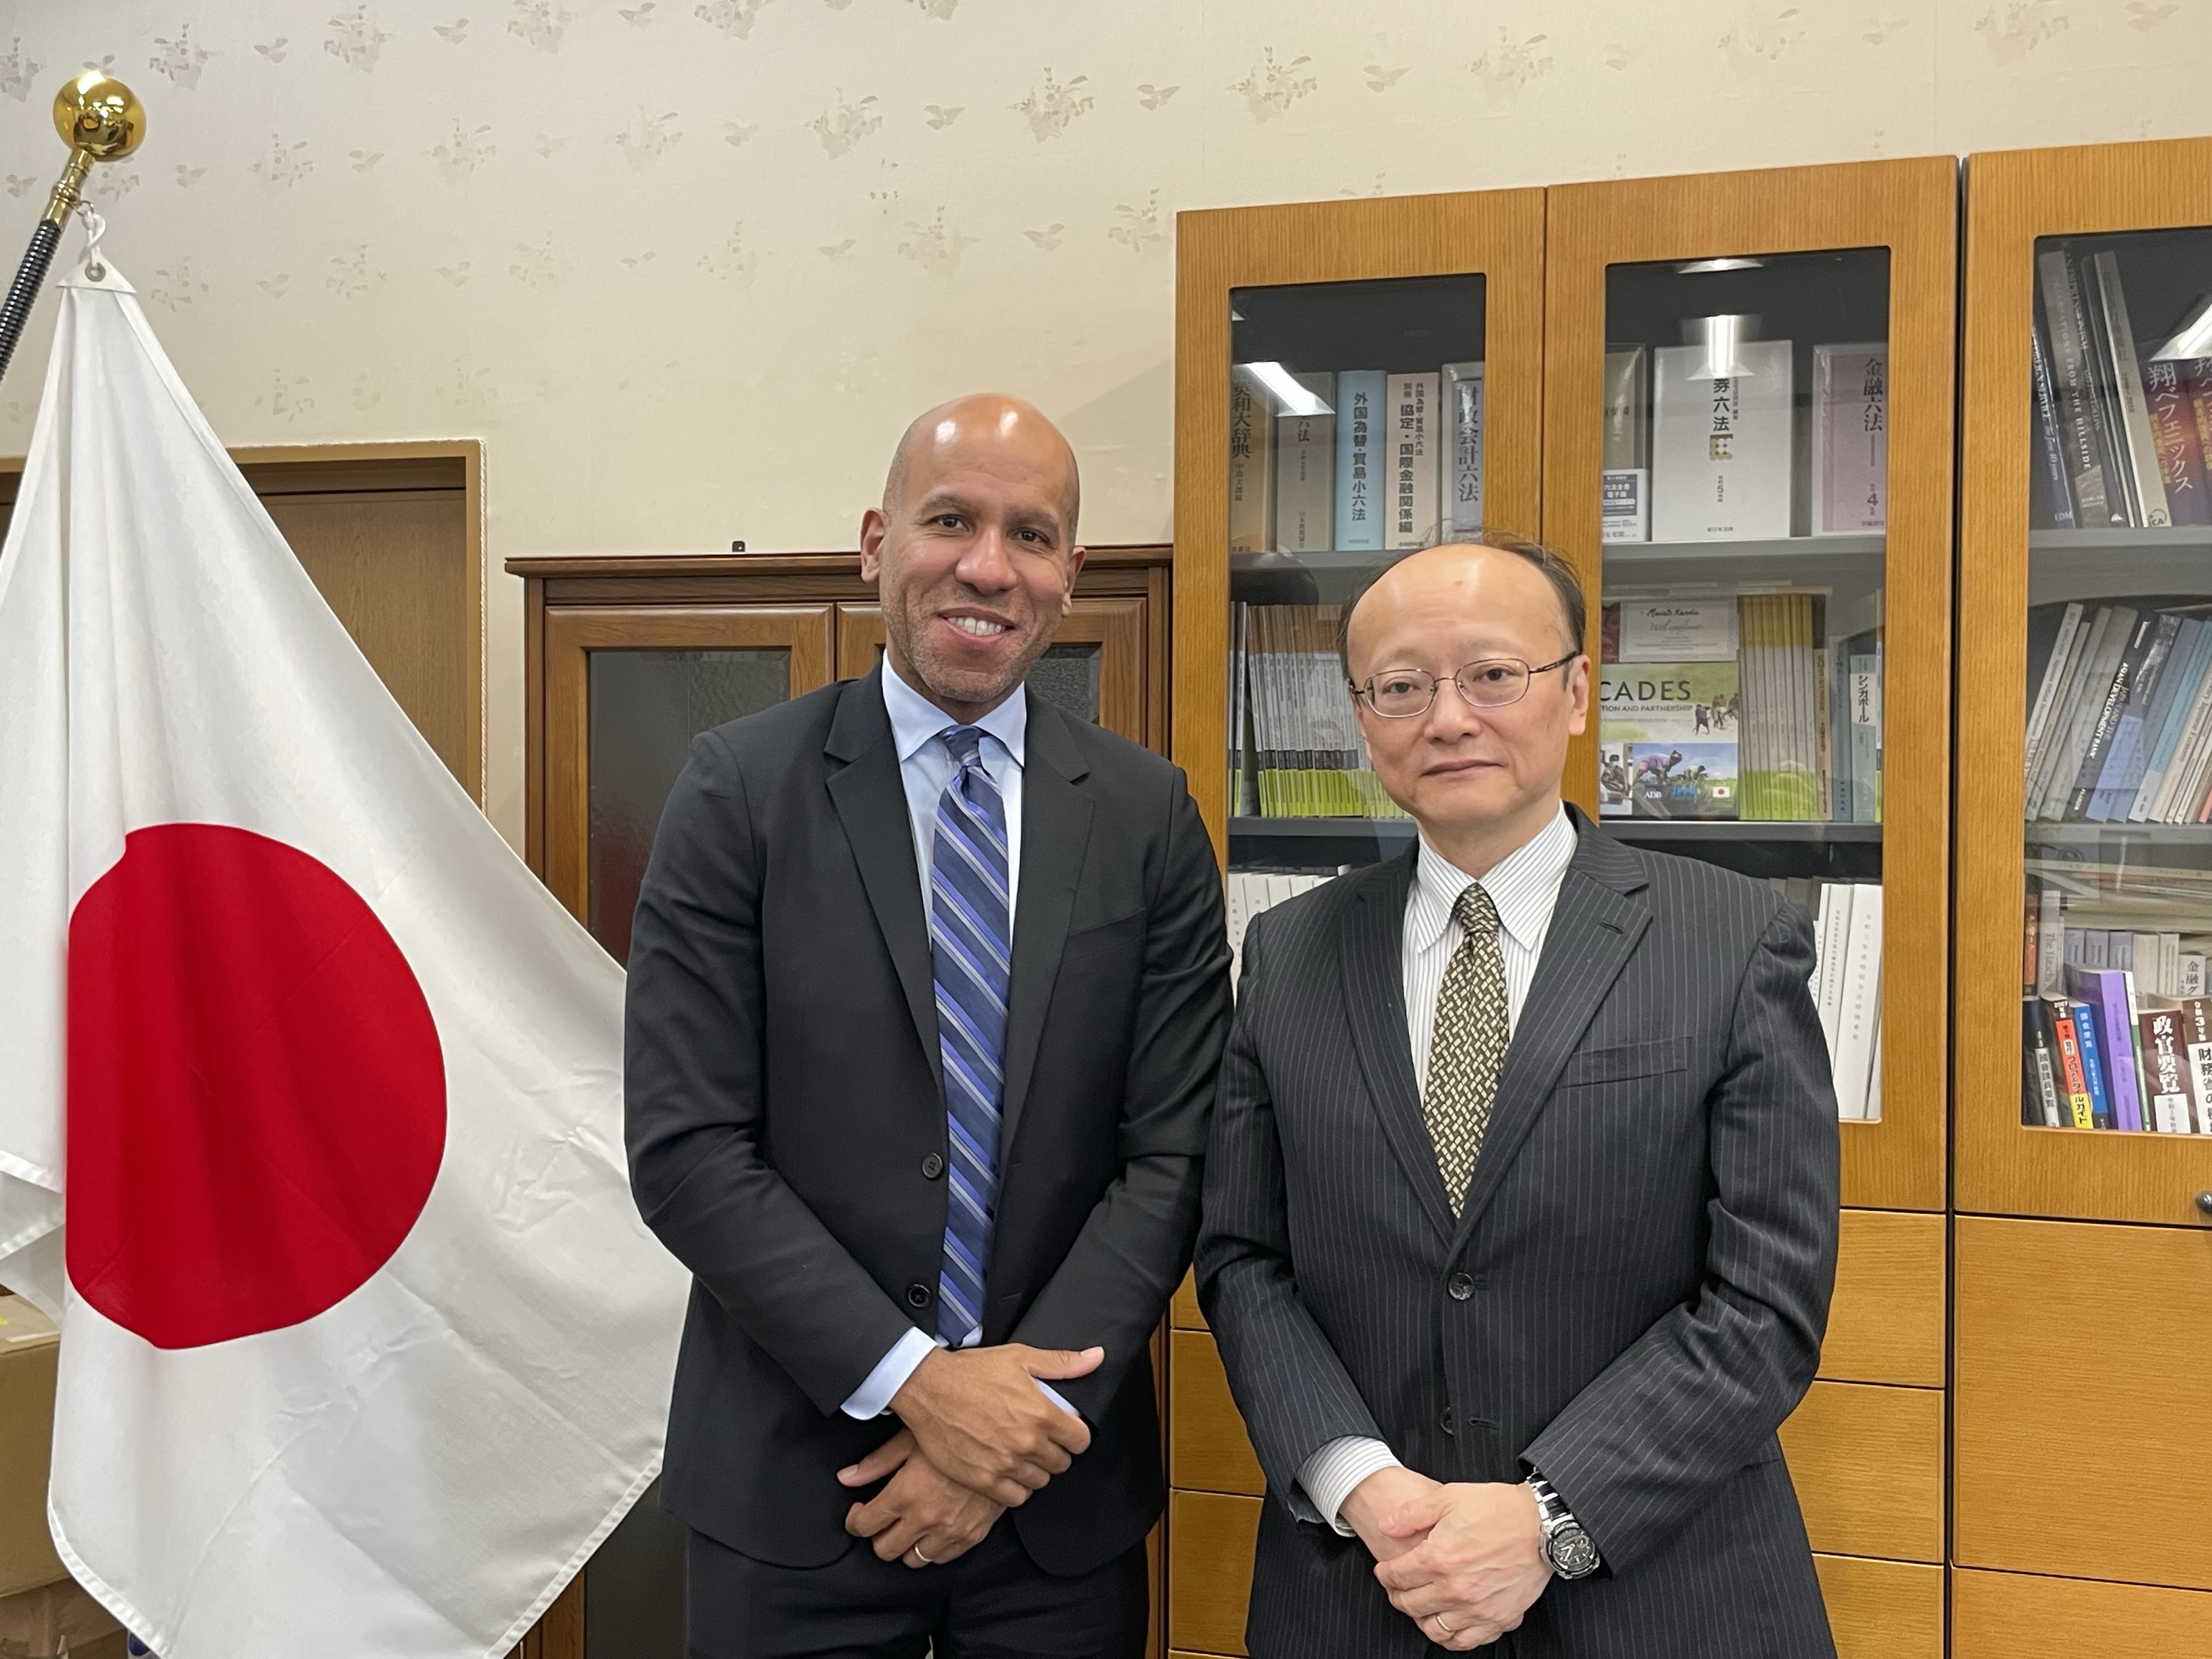 Meeting between Vice Minister KANDA Masato and Mr. Brian Nelson, Under Secretary for Terrorism and Financial Intelligence of the Treasury of the United States of America